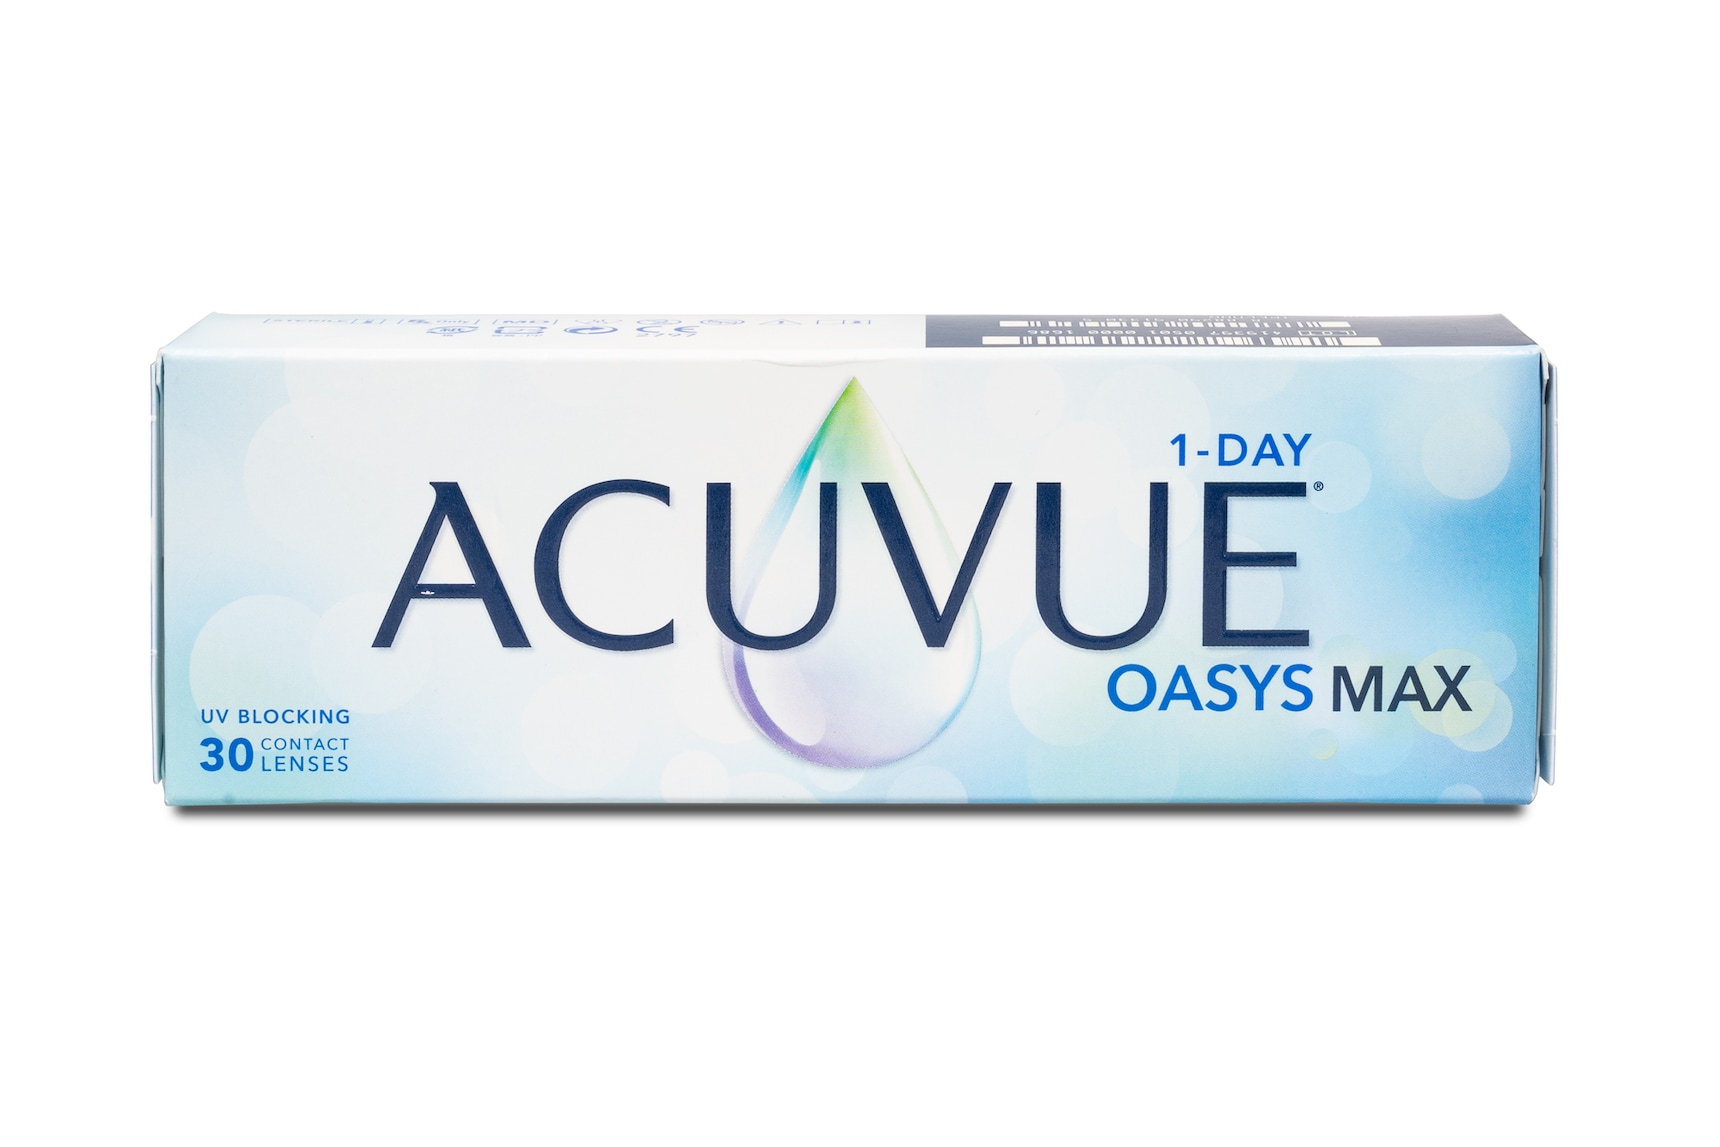 Acuvue Oasys 1-Day Max